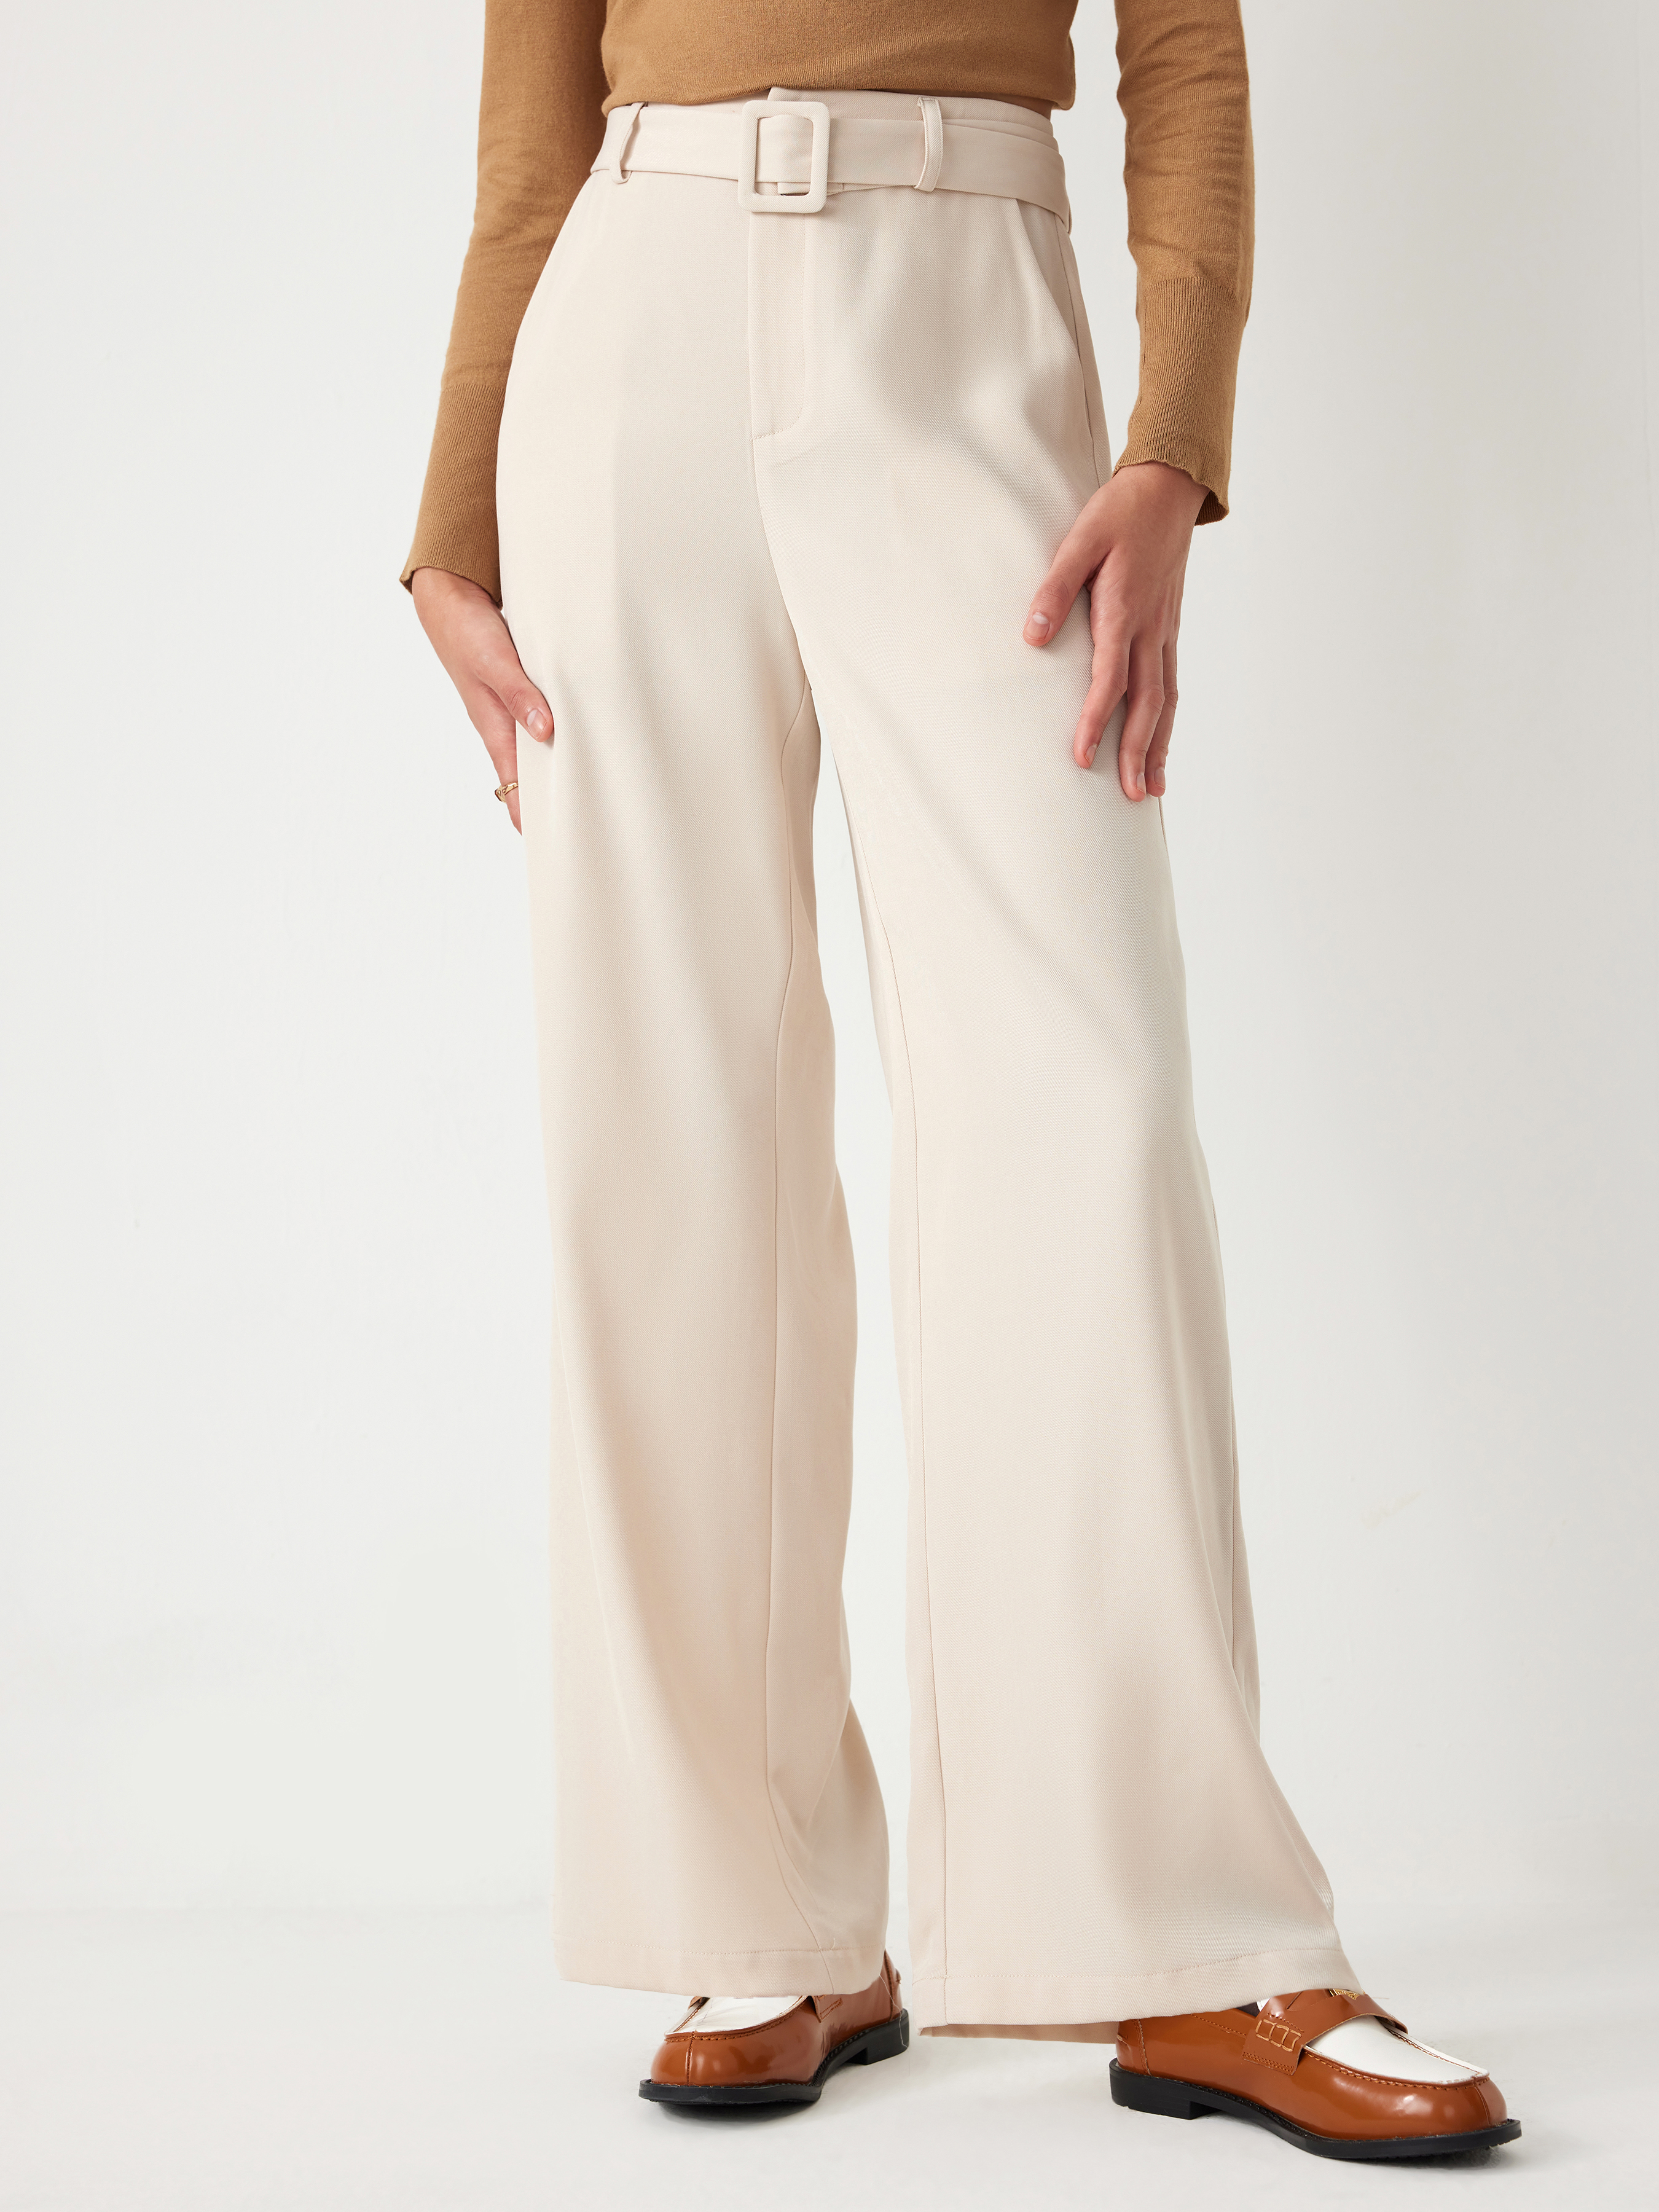 Mesh Bustier Trousers in Ivory